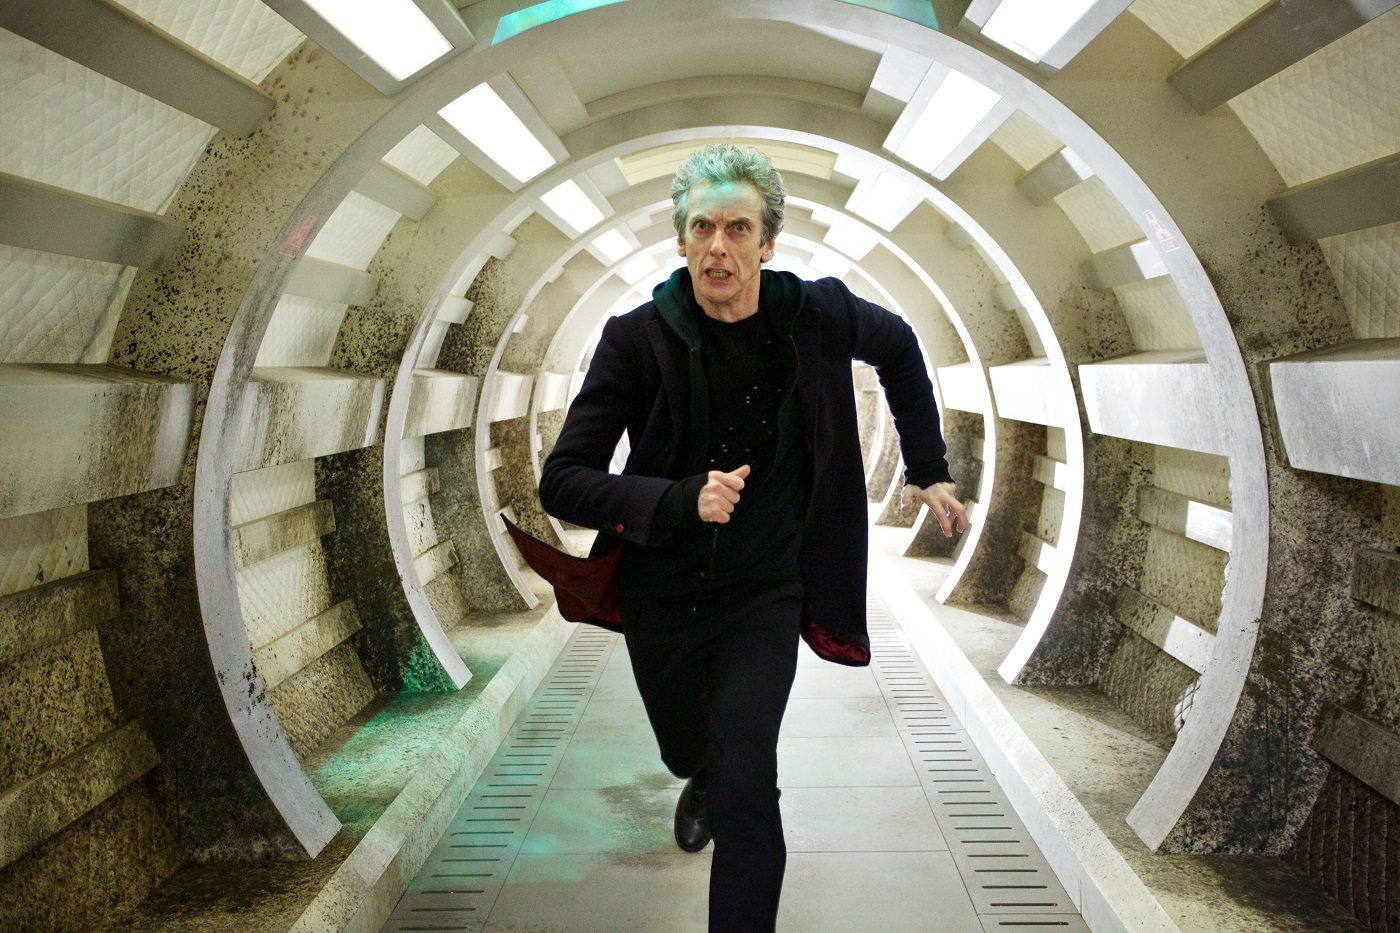 Peter Capaldi as Doctor Who running down a futuristic, circular corridor straight towards the camera. He's wearing an all-black outfit and looks worried.